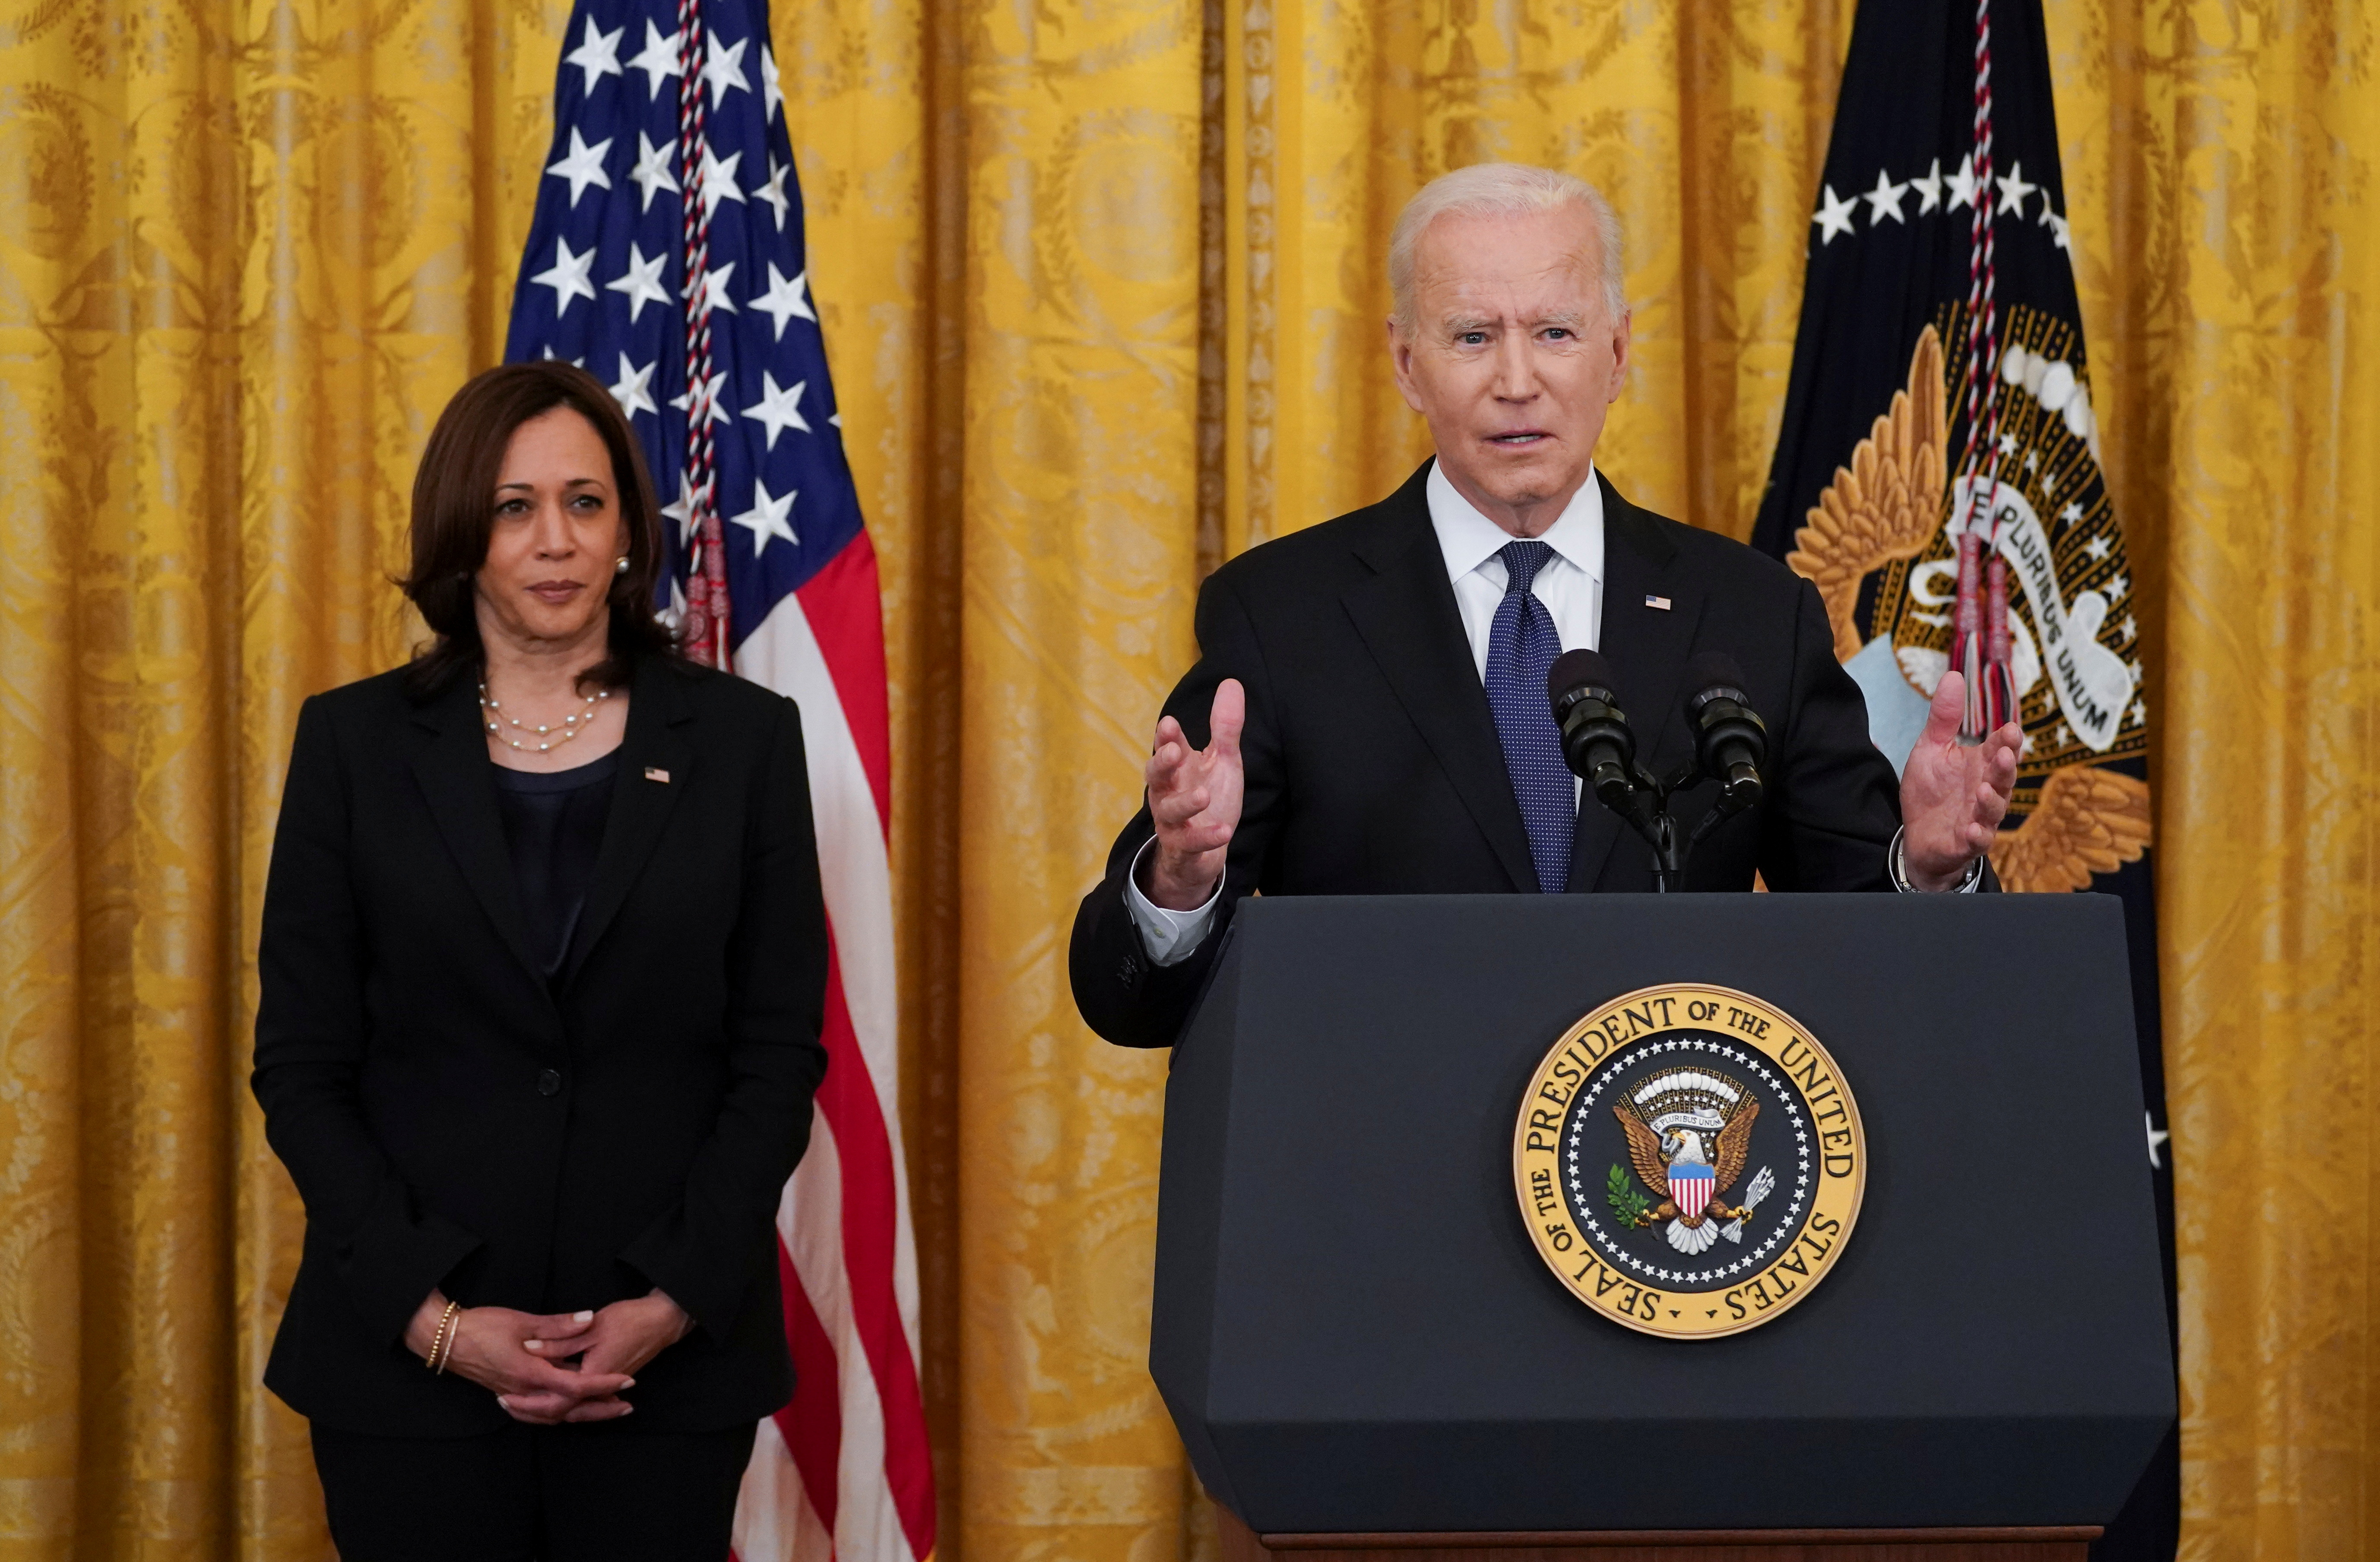 U.S. President Biden signs the COVID-19 Hate Crimes Act at the White House in Washington